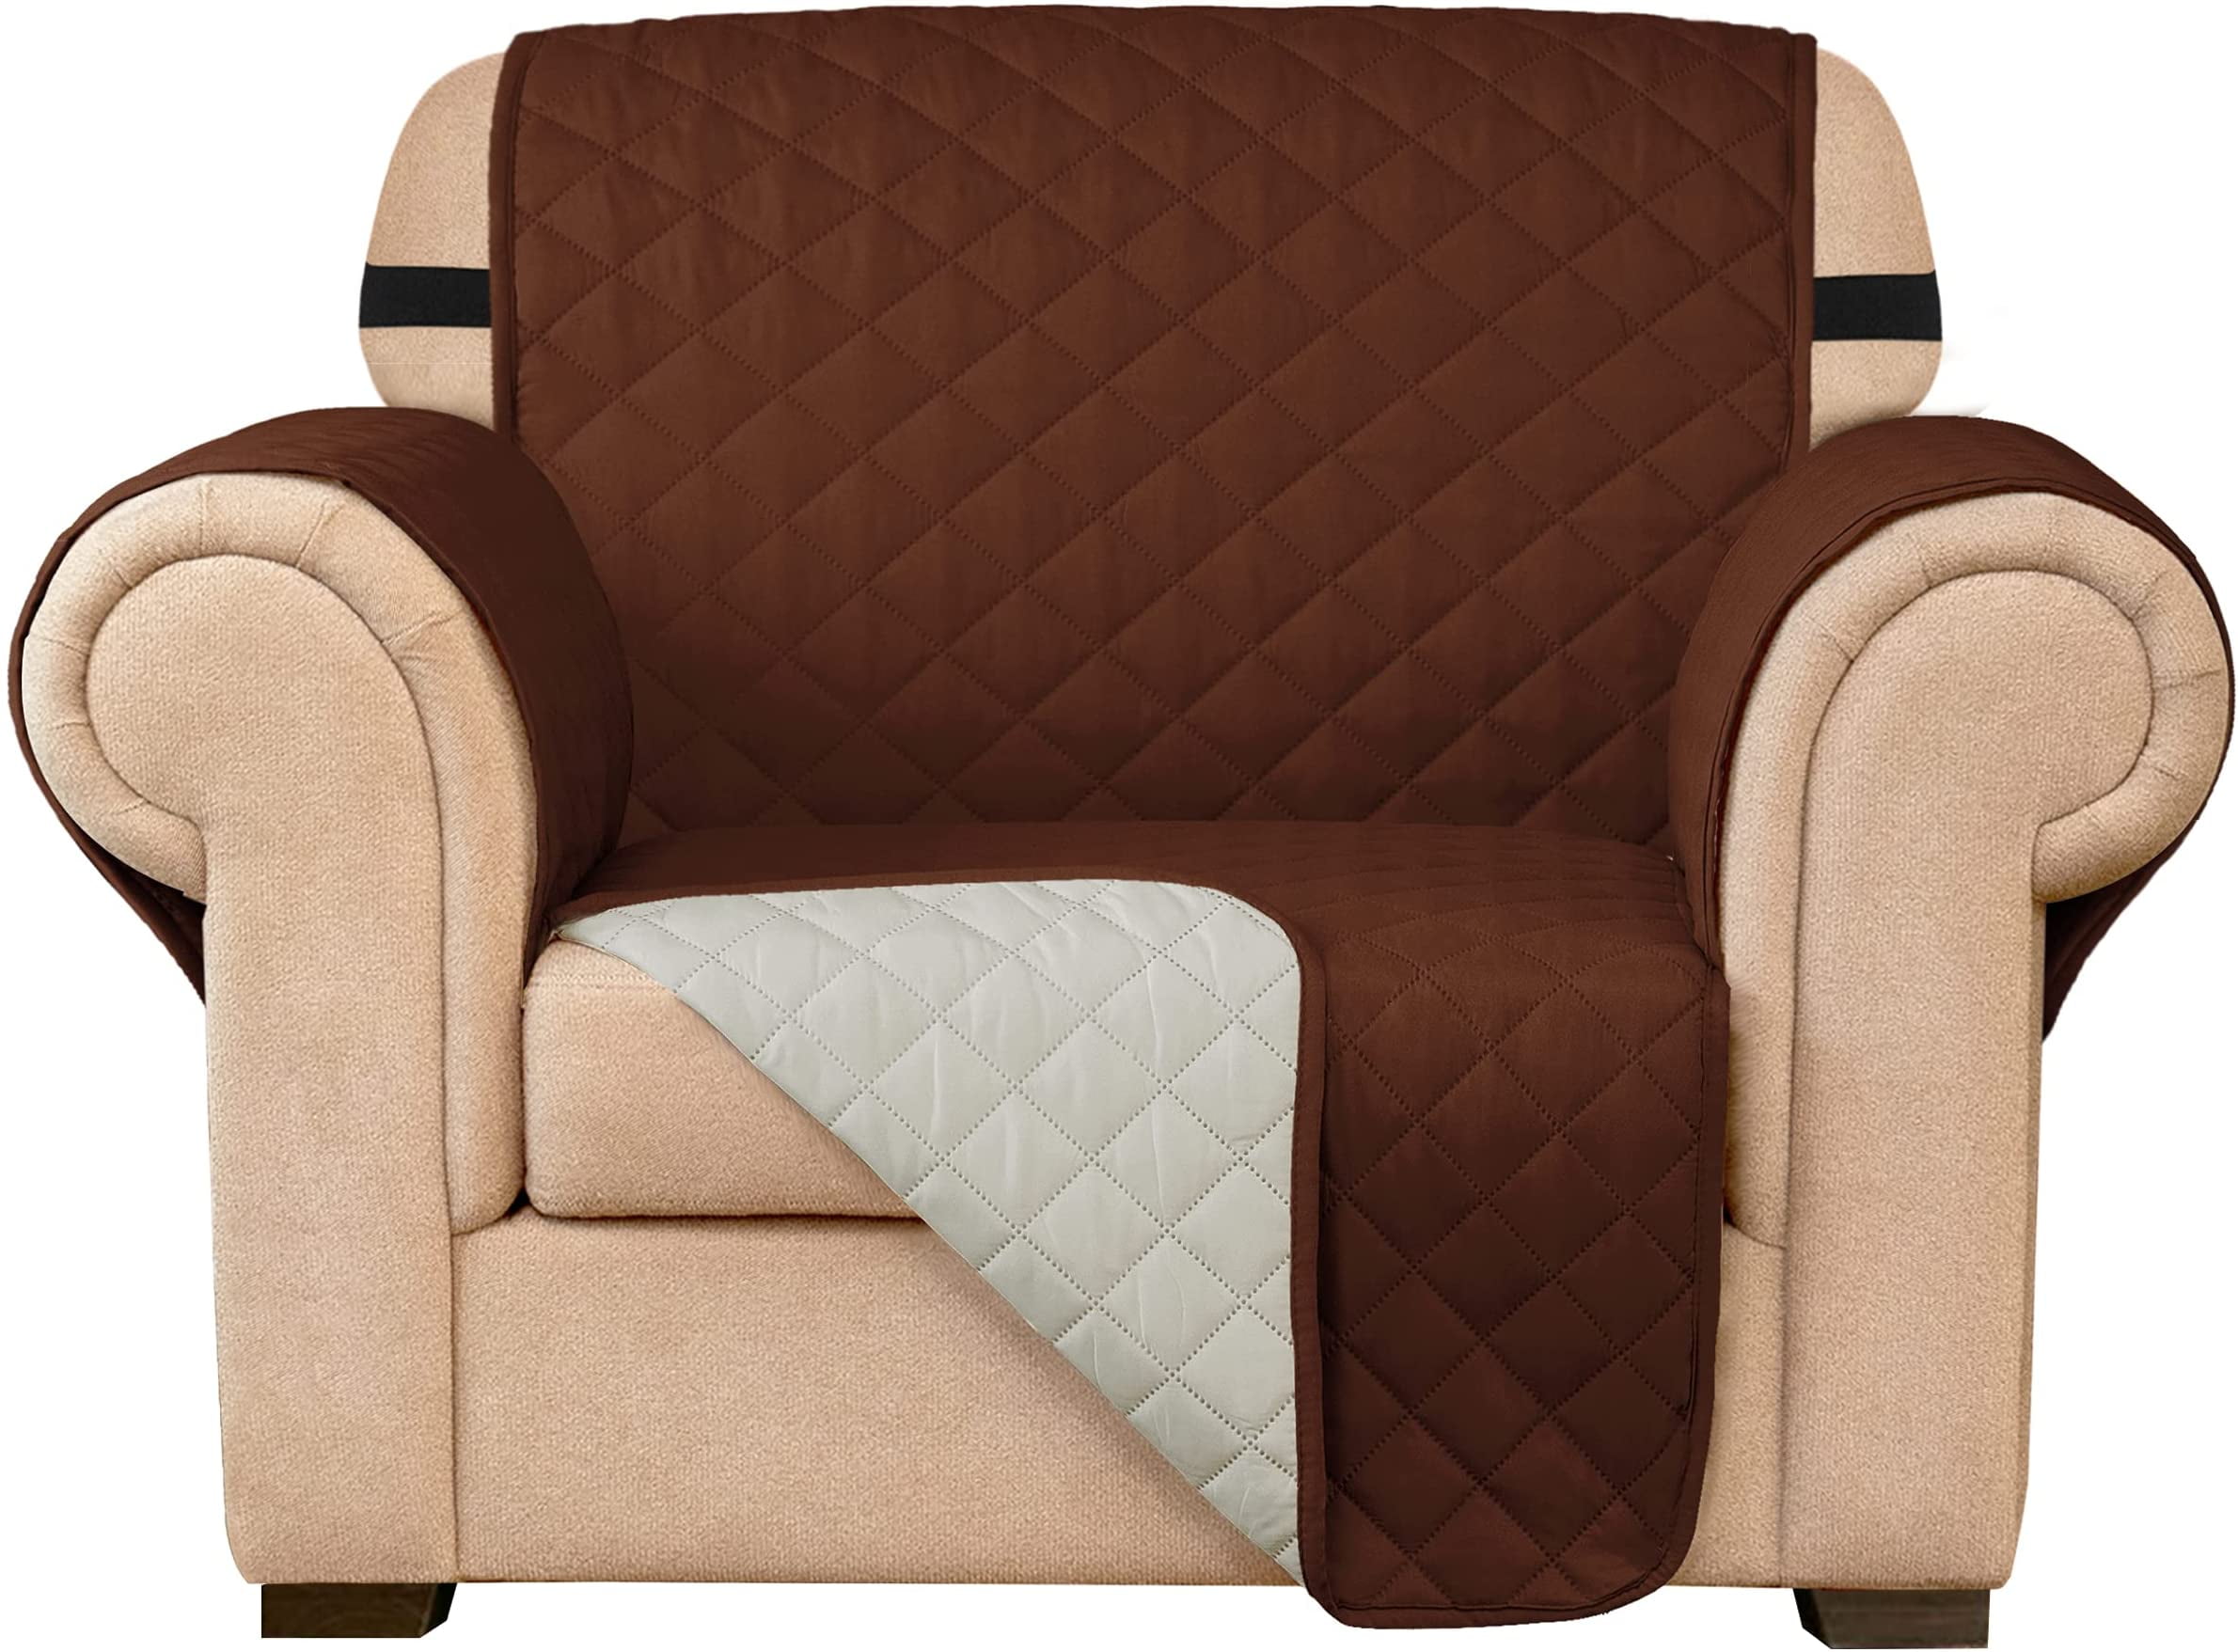 BURGUNDY-RECLINER COVER-STRETCH-CHECKERBOARD-IN 4 COLORS-AVAIL IN ALL SIZES  XX 